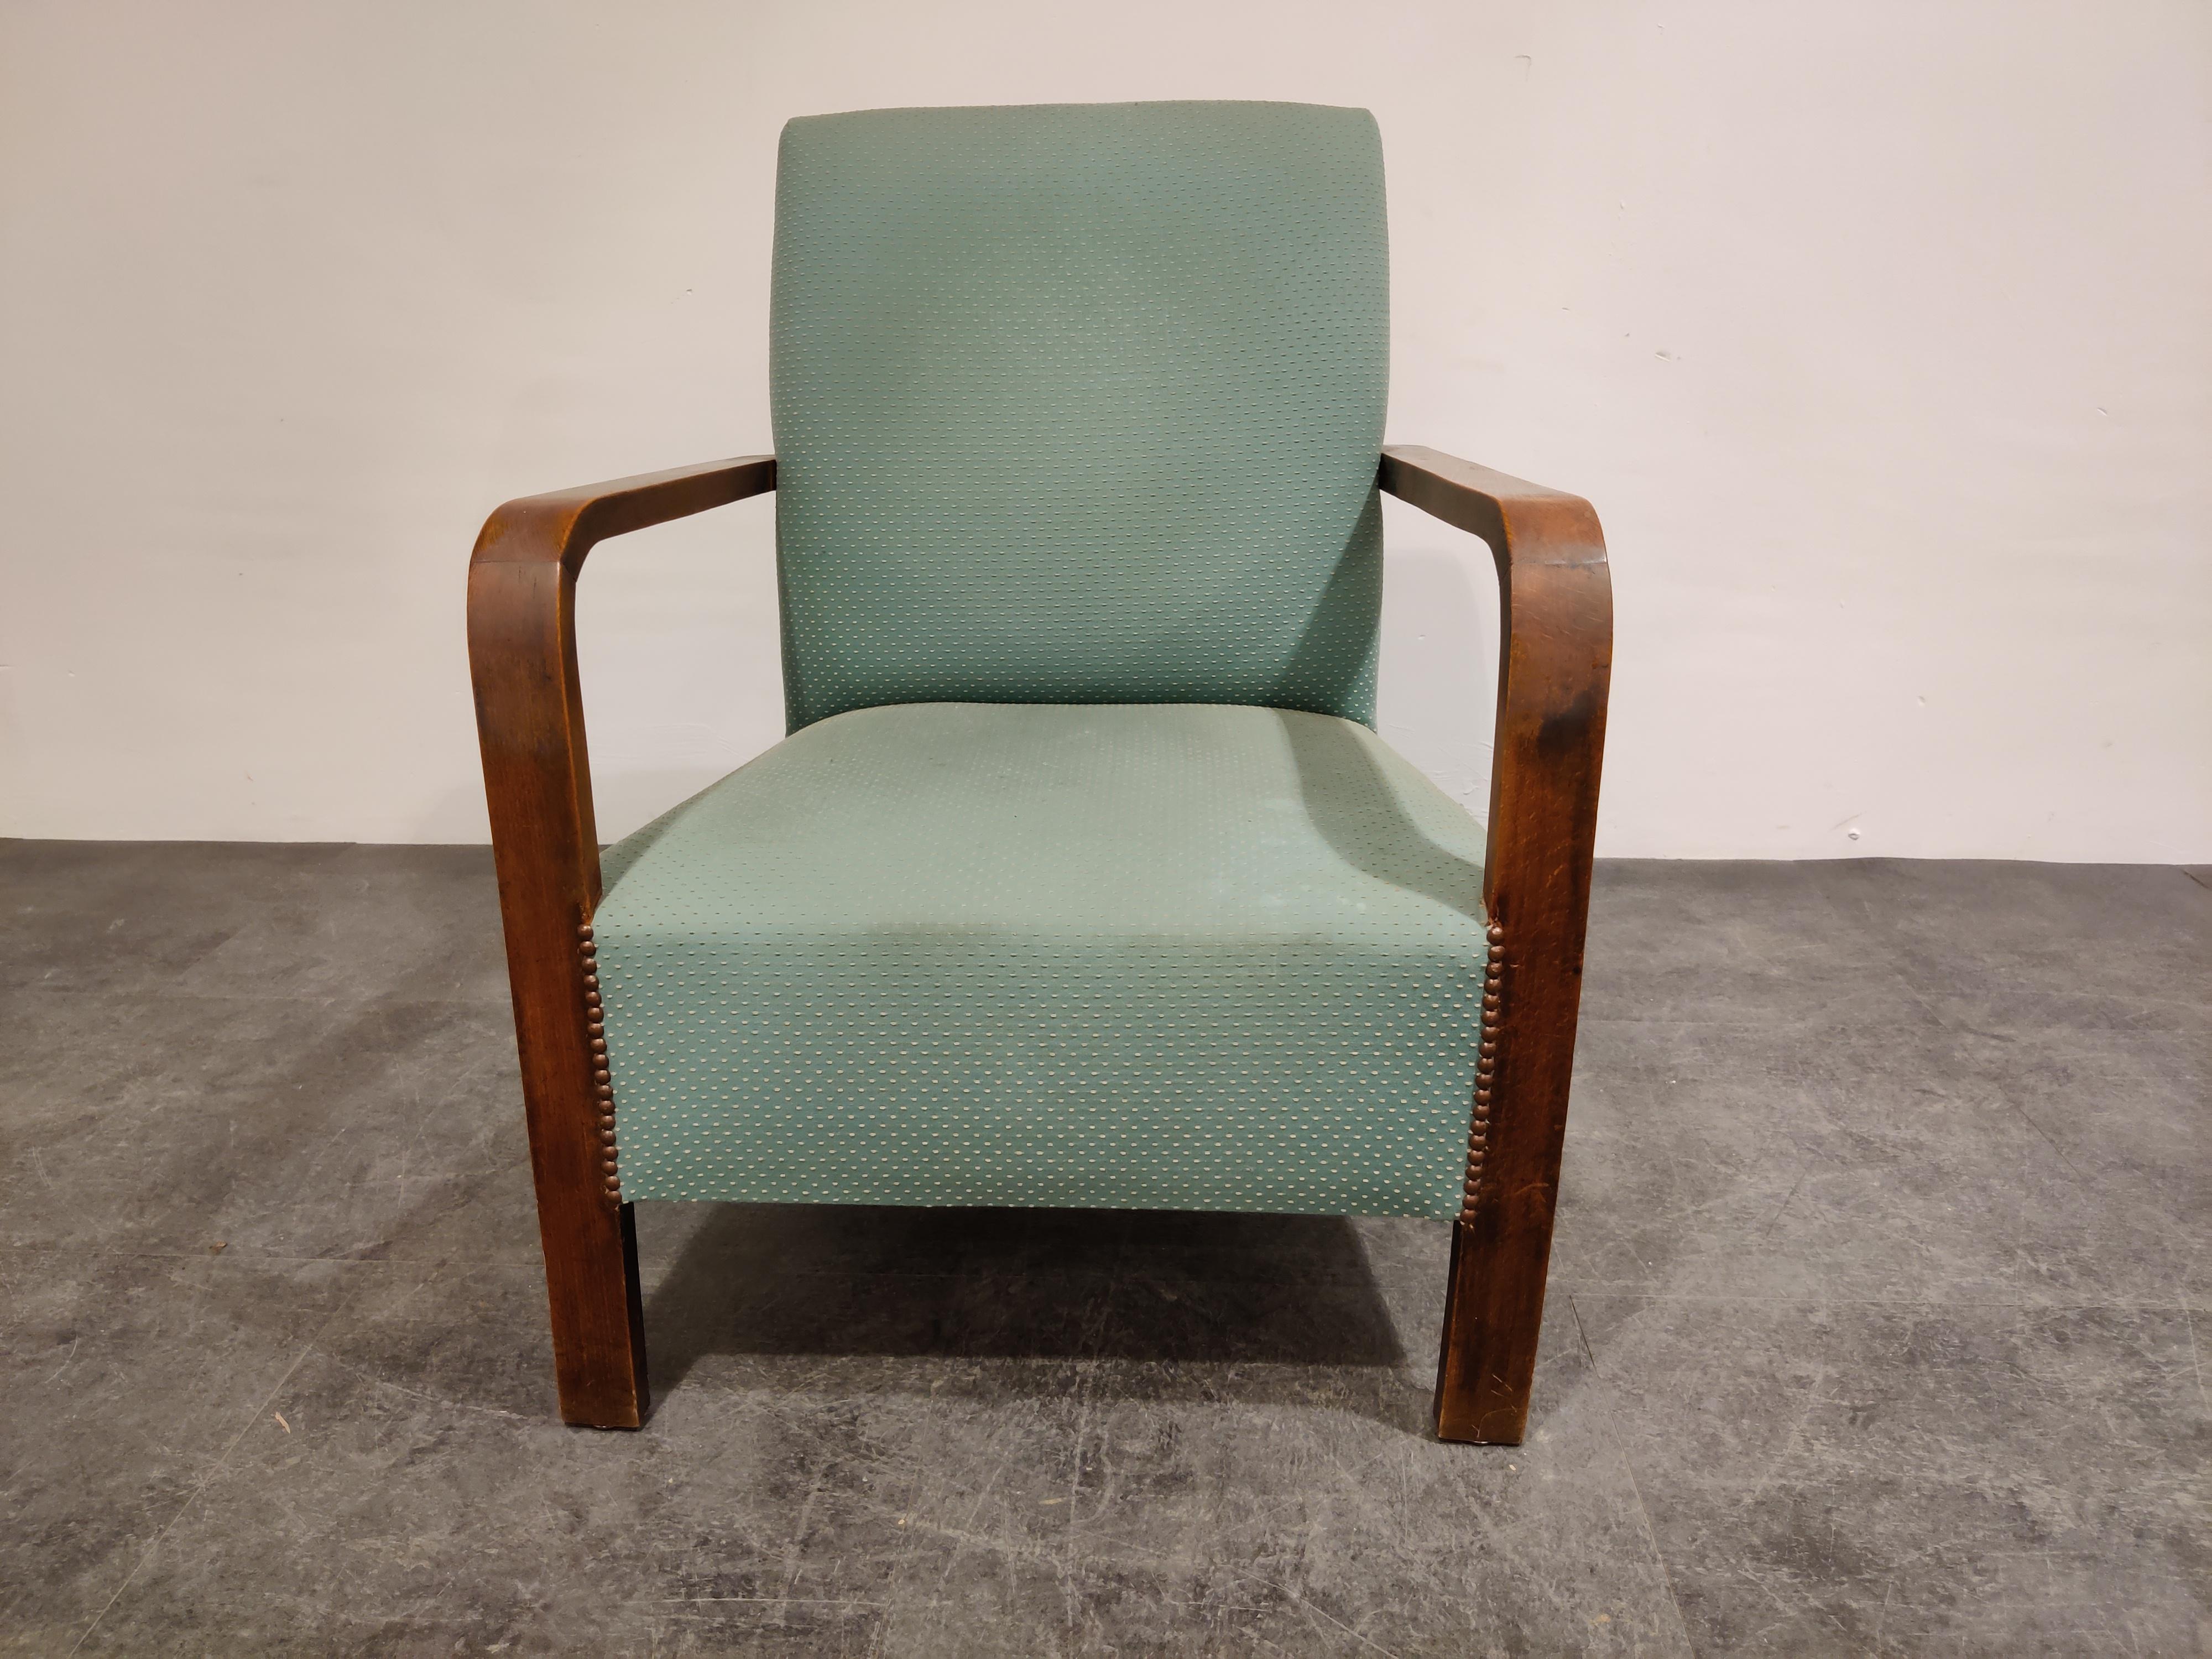 Elegant Art Deco armchair with original green fabric.

Typical Art Deco era design

Good condition, minor staining on the fabric.

Very comfy chair. 

1930s - Belgium

Dimensions: 
Height 85cm/33.46